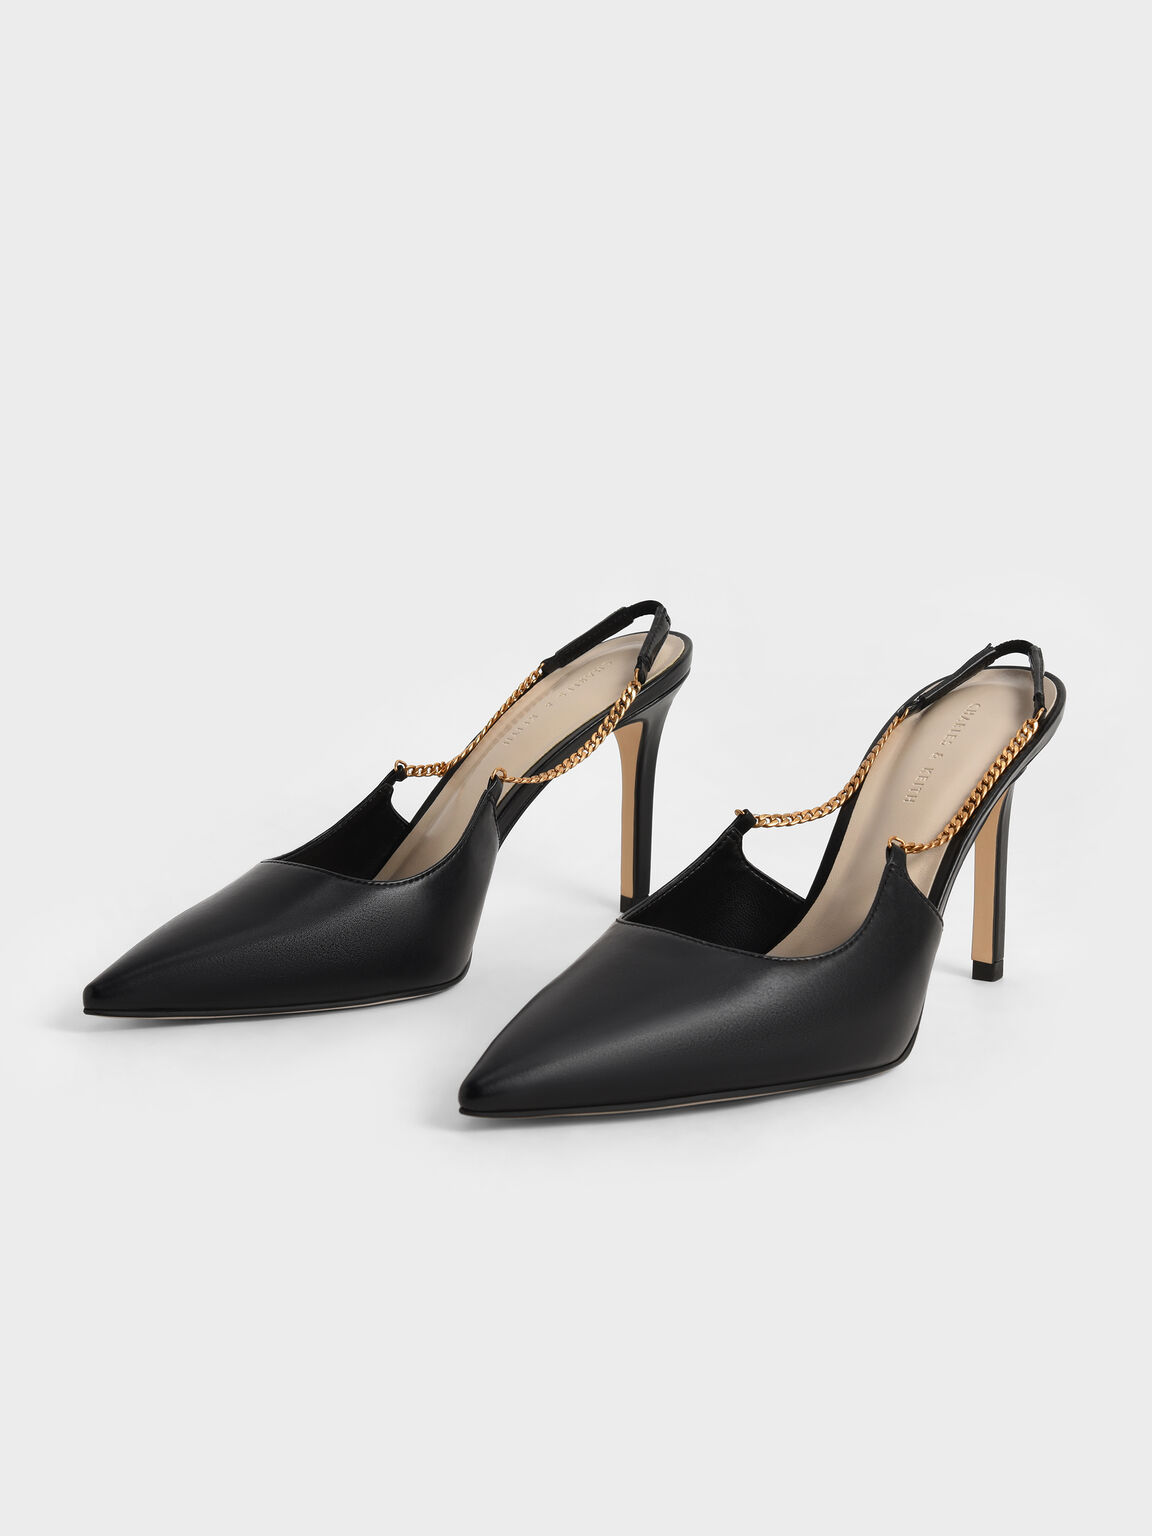 Black Chain-Link Slingback Stiletto Pumps - CHARLES & KEITH MO